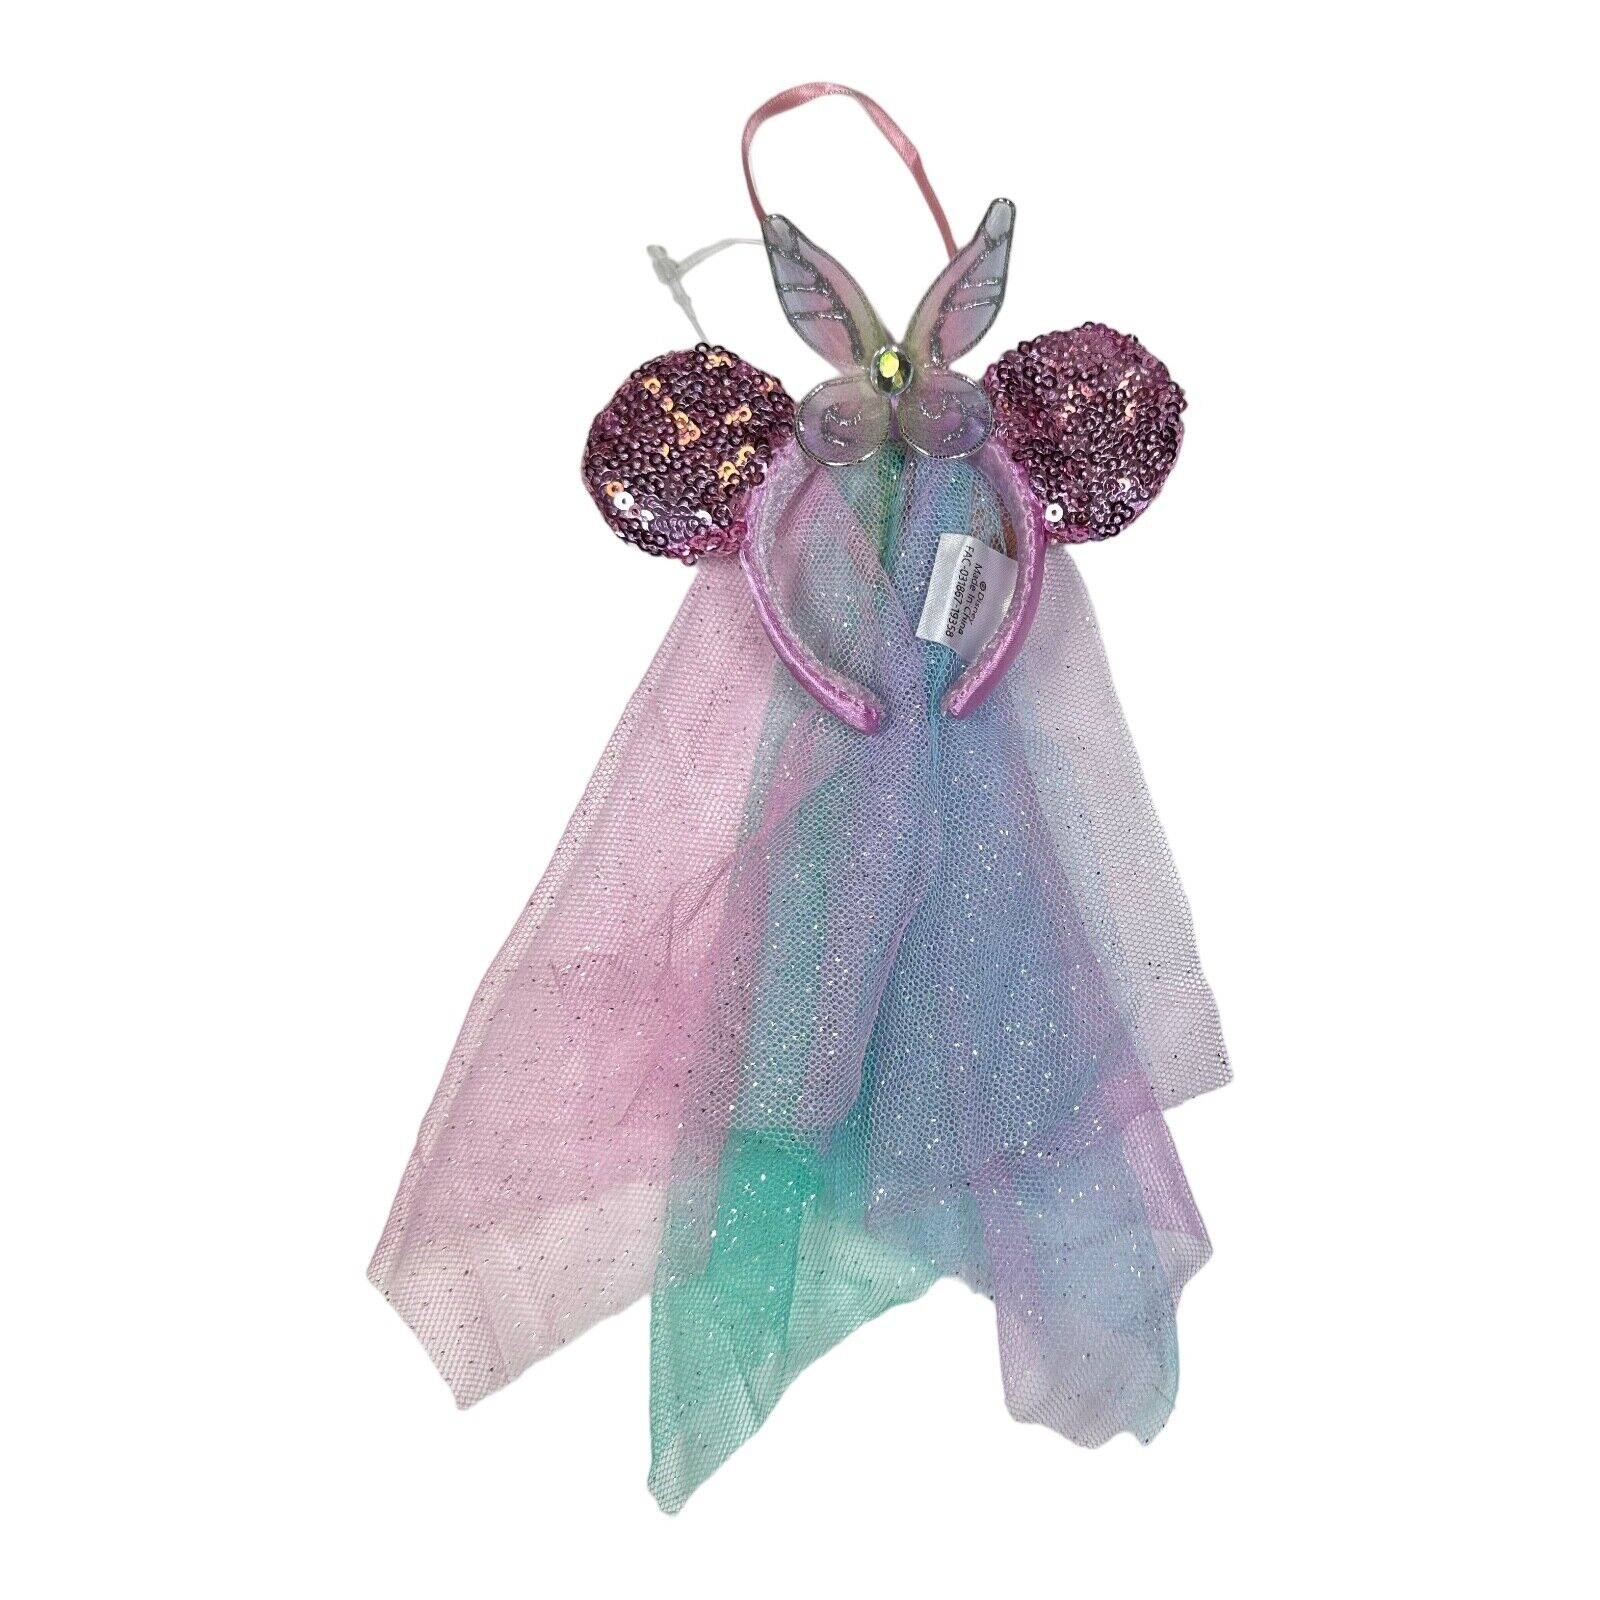 2019 Disney Parks Fairy Wings Minnie Mouse Ears Ornament